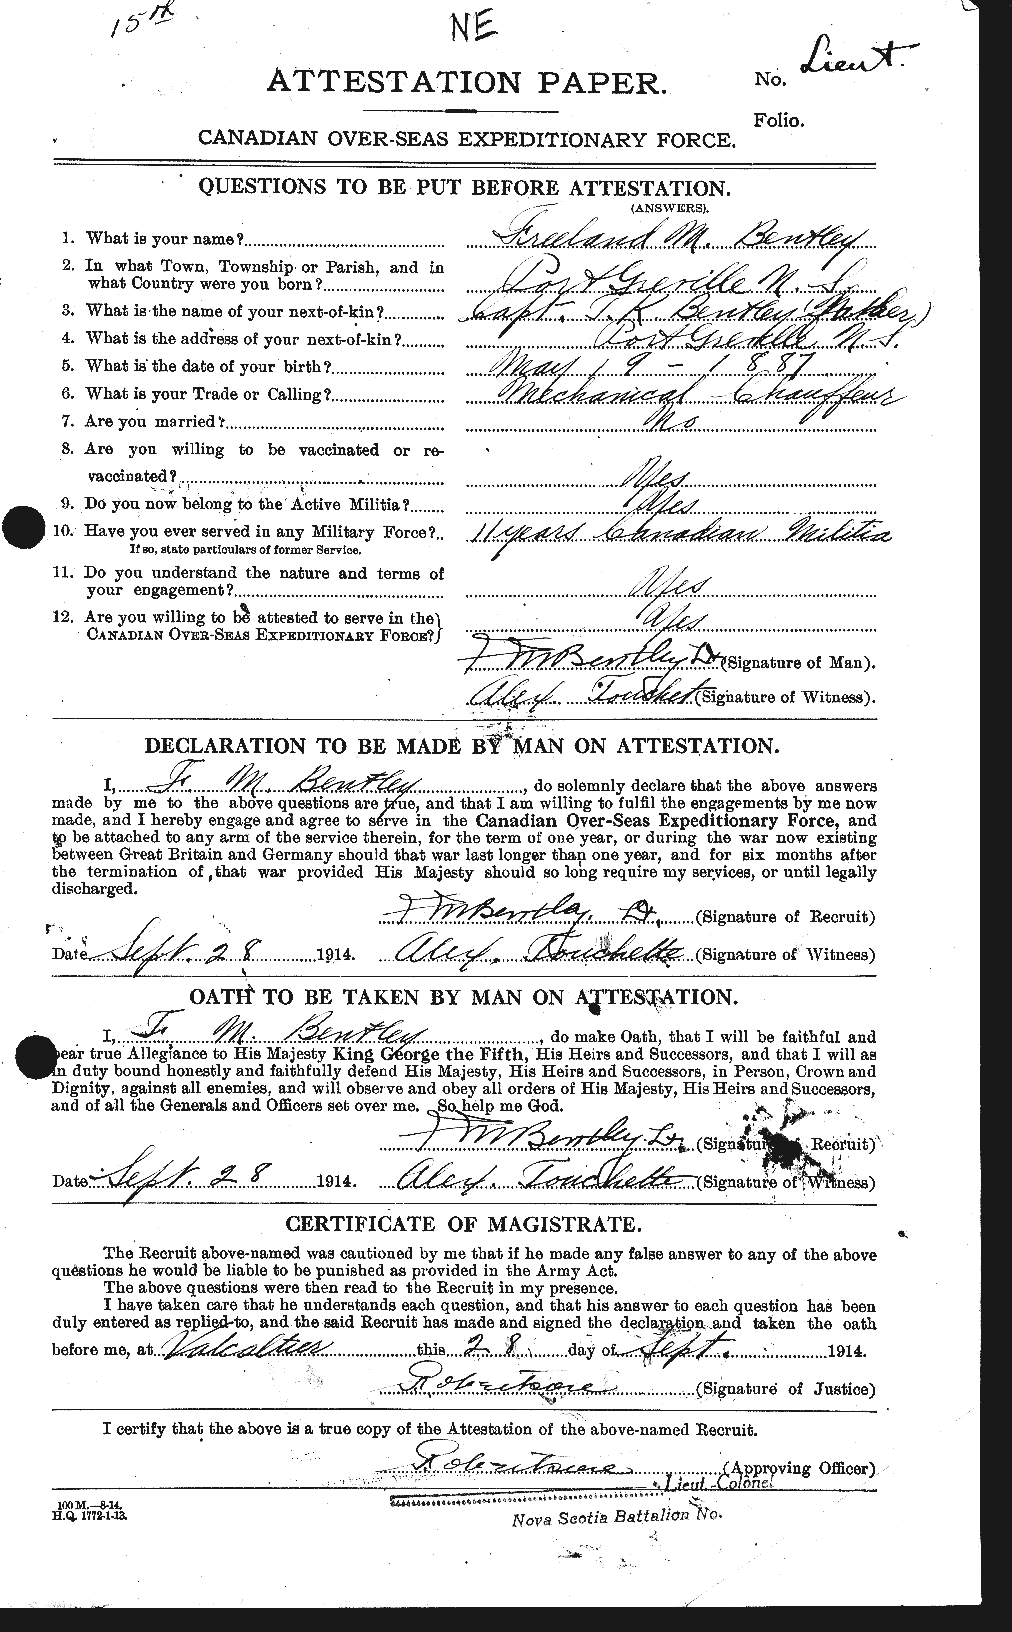 Personnel Records of the First World War - CEF 237921a